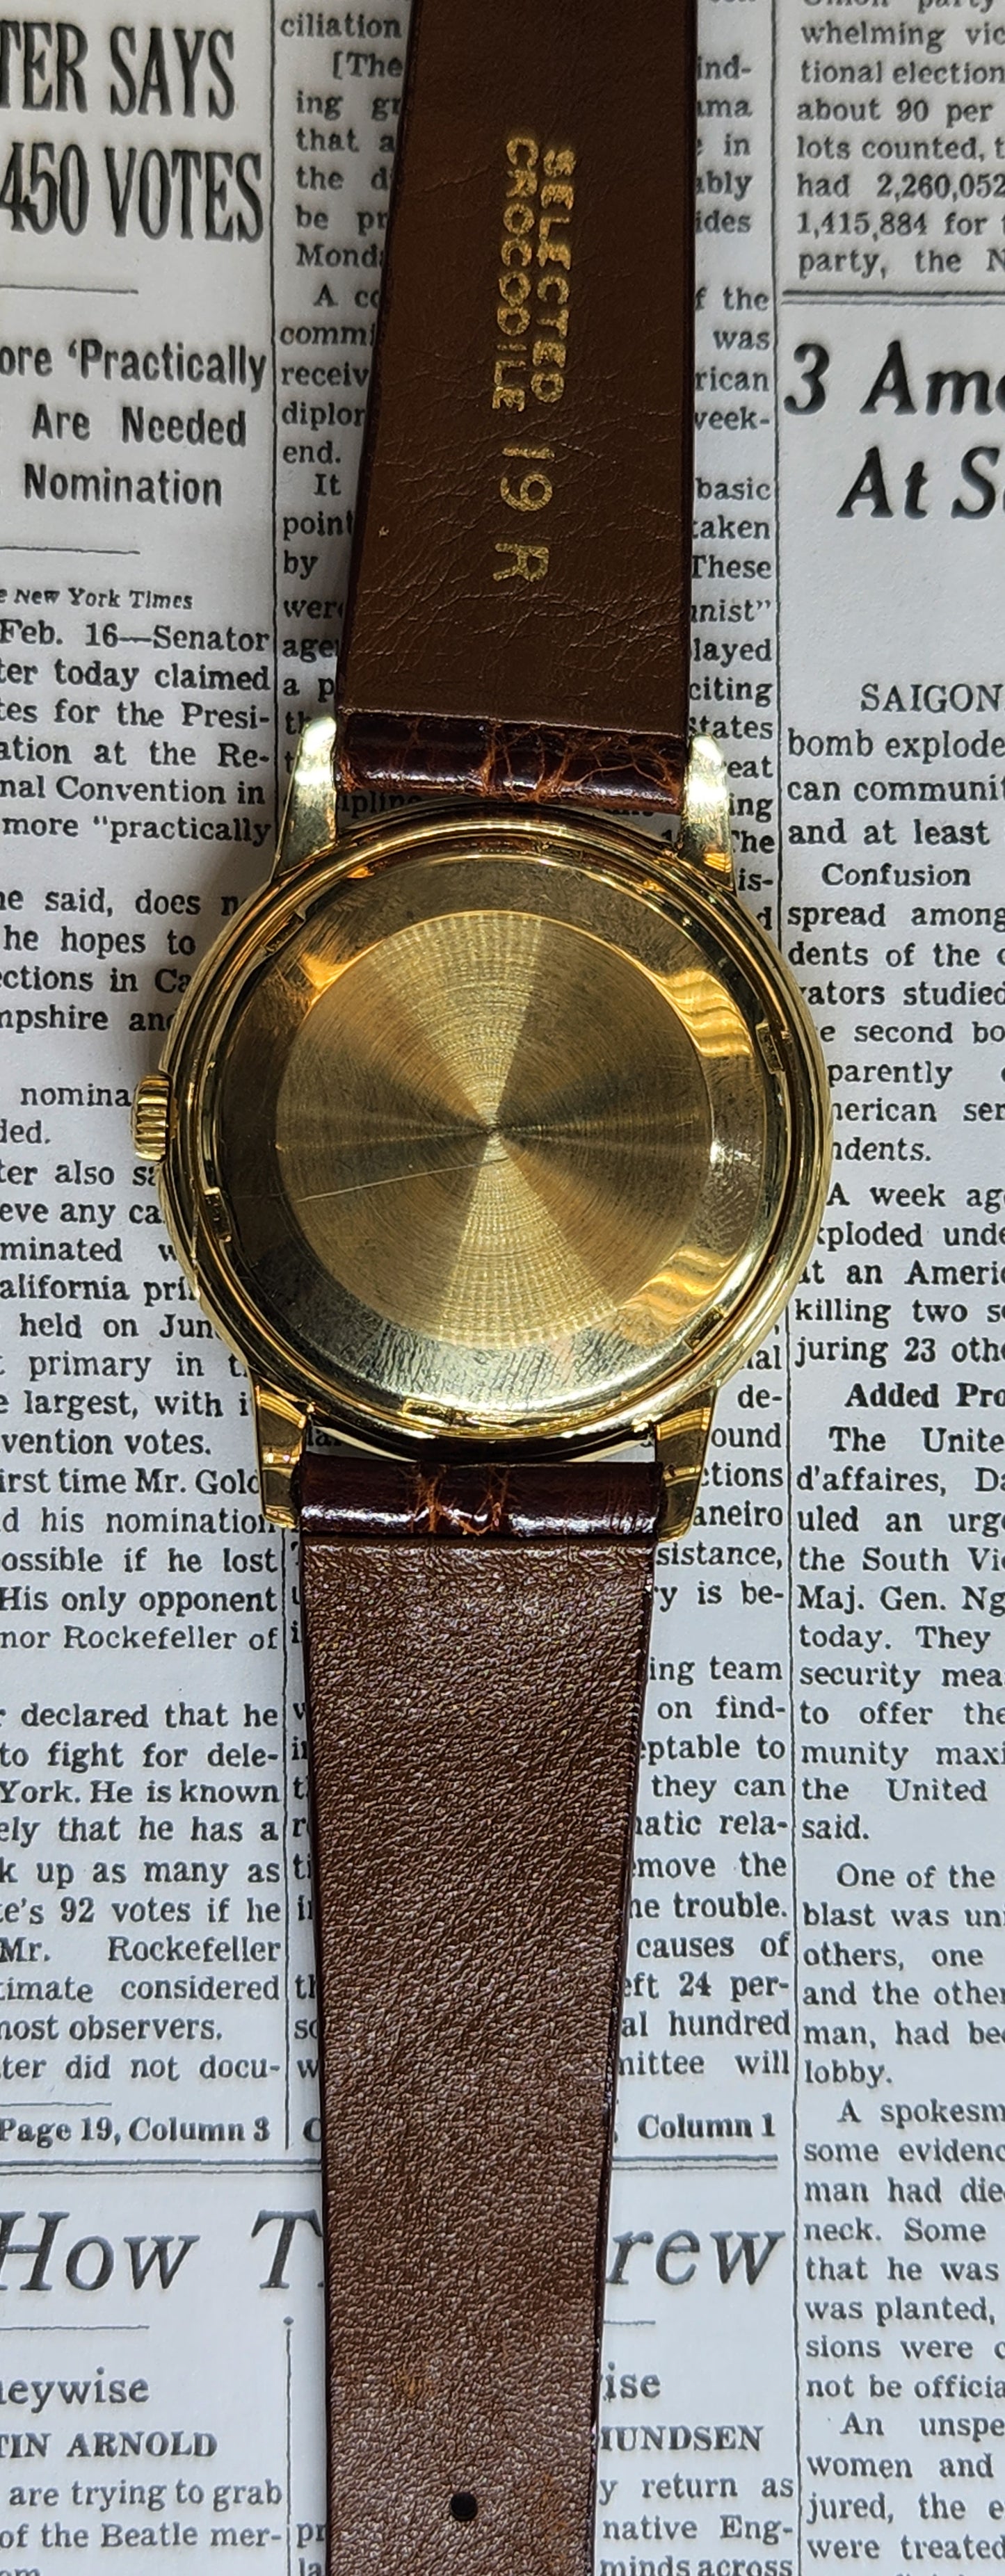 Patek Philippe 3433 18kt yellow Gold Automatic with a waterproof case from the 1950's